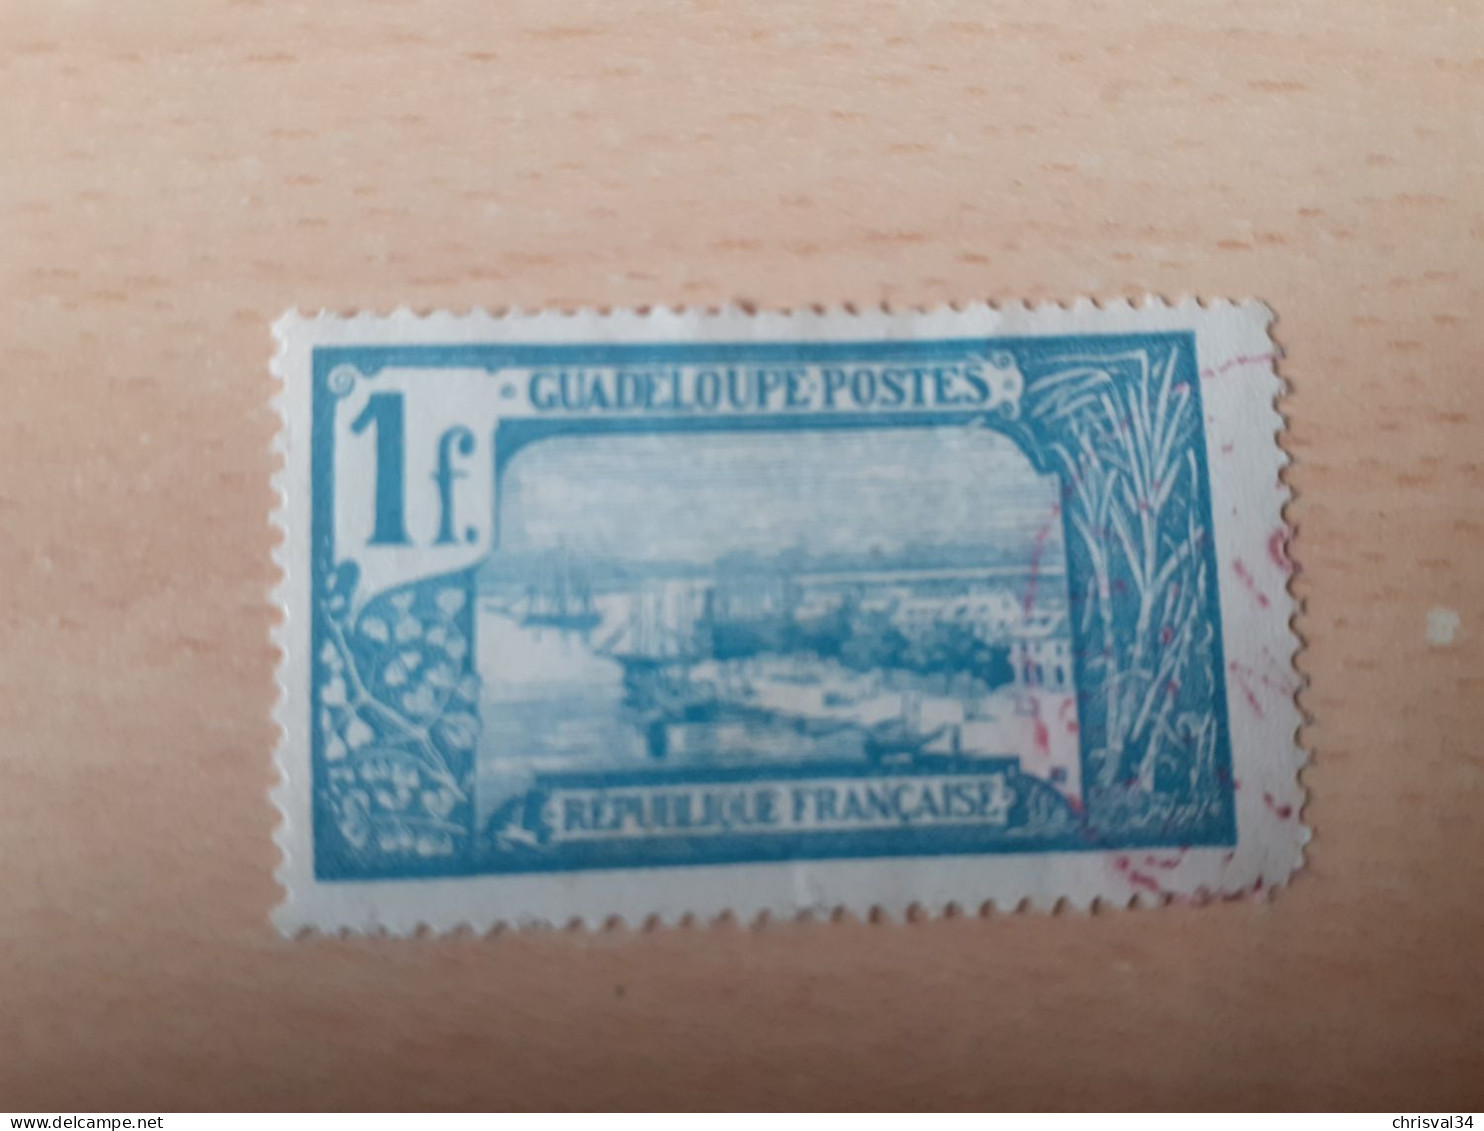 TIMBRE   GUADELOUPE       N  88     COTE  1,25   EUROS  OBLITERE - Gebruikt